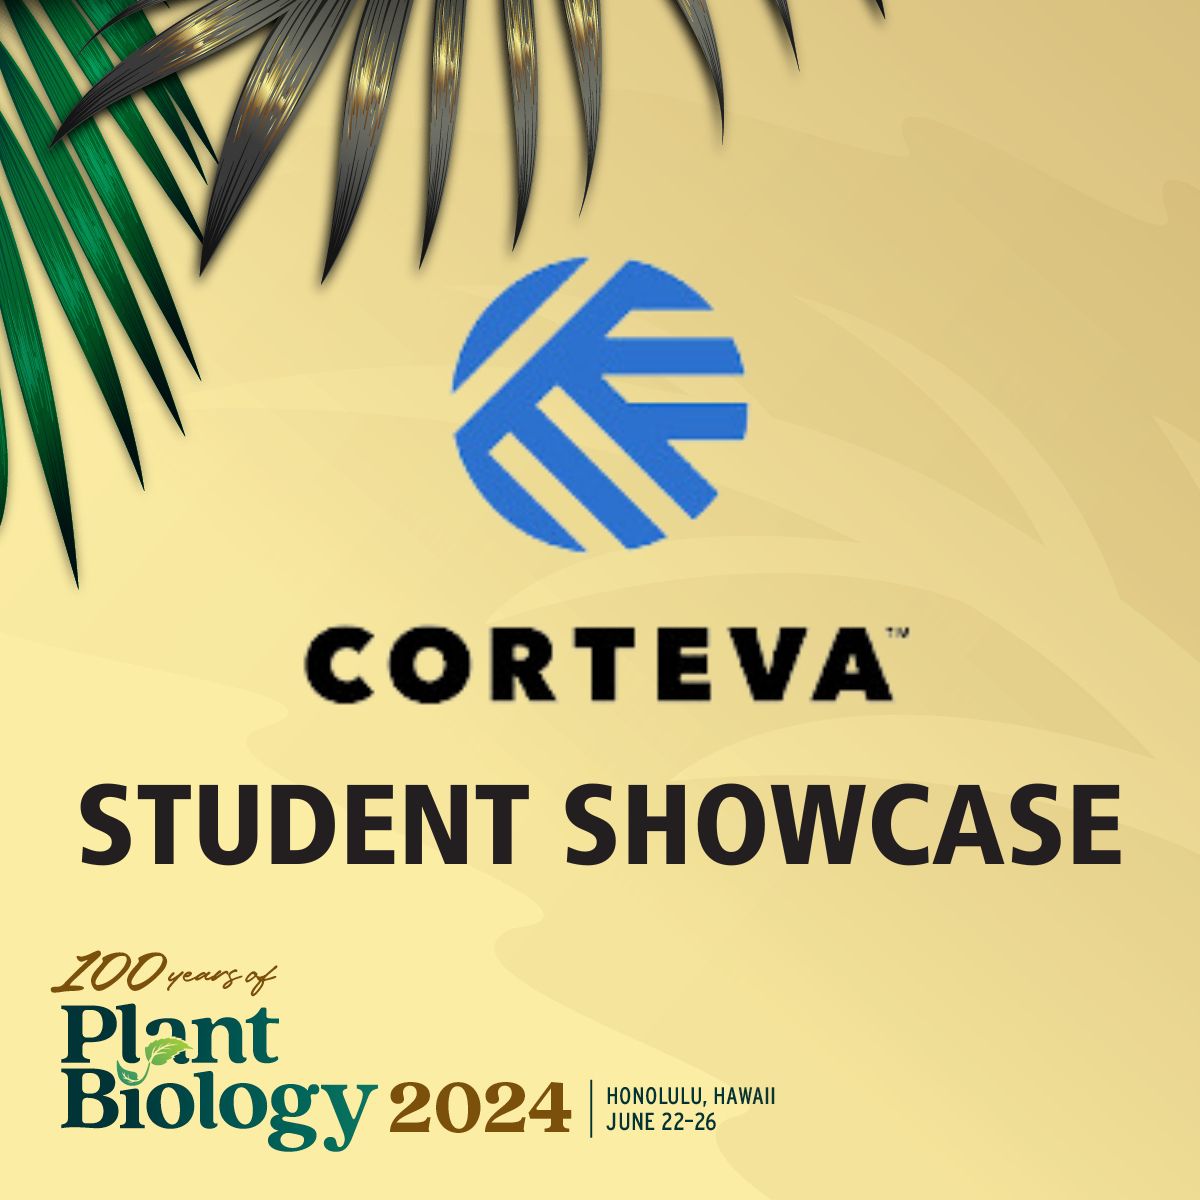 A diverse group of invited students will share their work in @Corteva Student Showcase, a #PlantBio2024 event not to be missed. See the complete program now. buff.ly/3Wqm36X